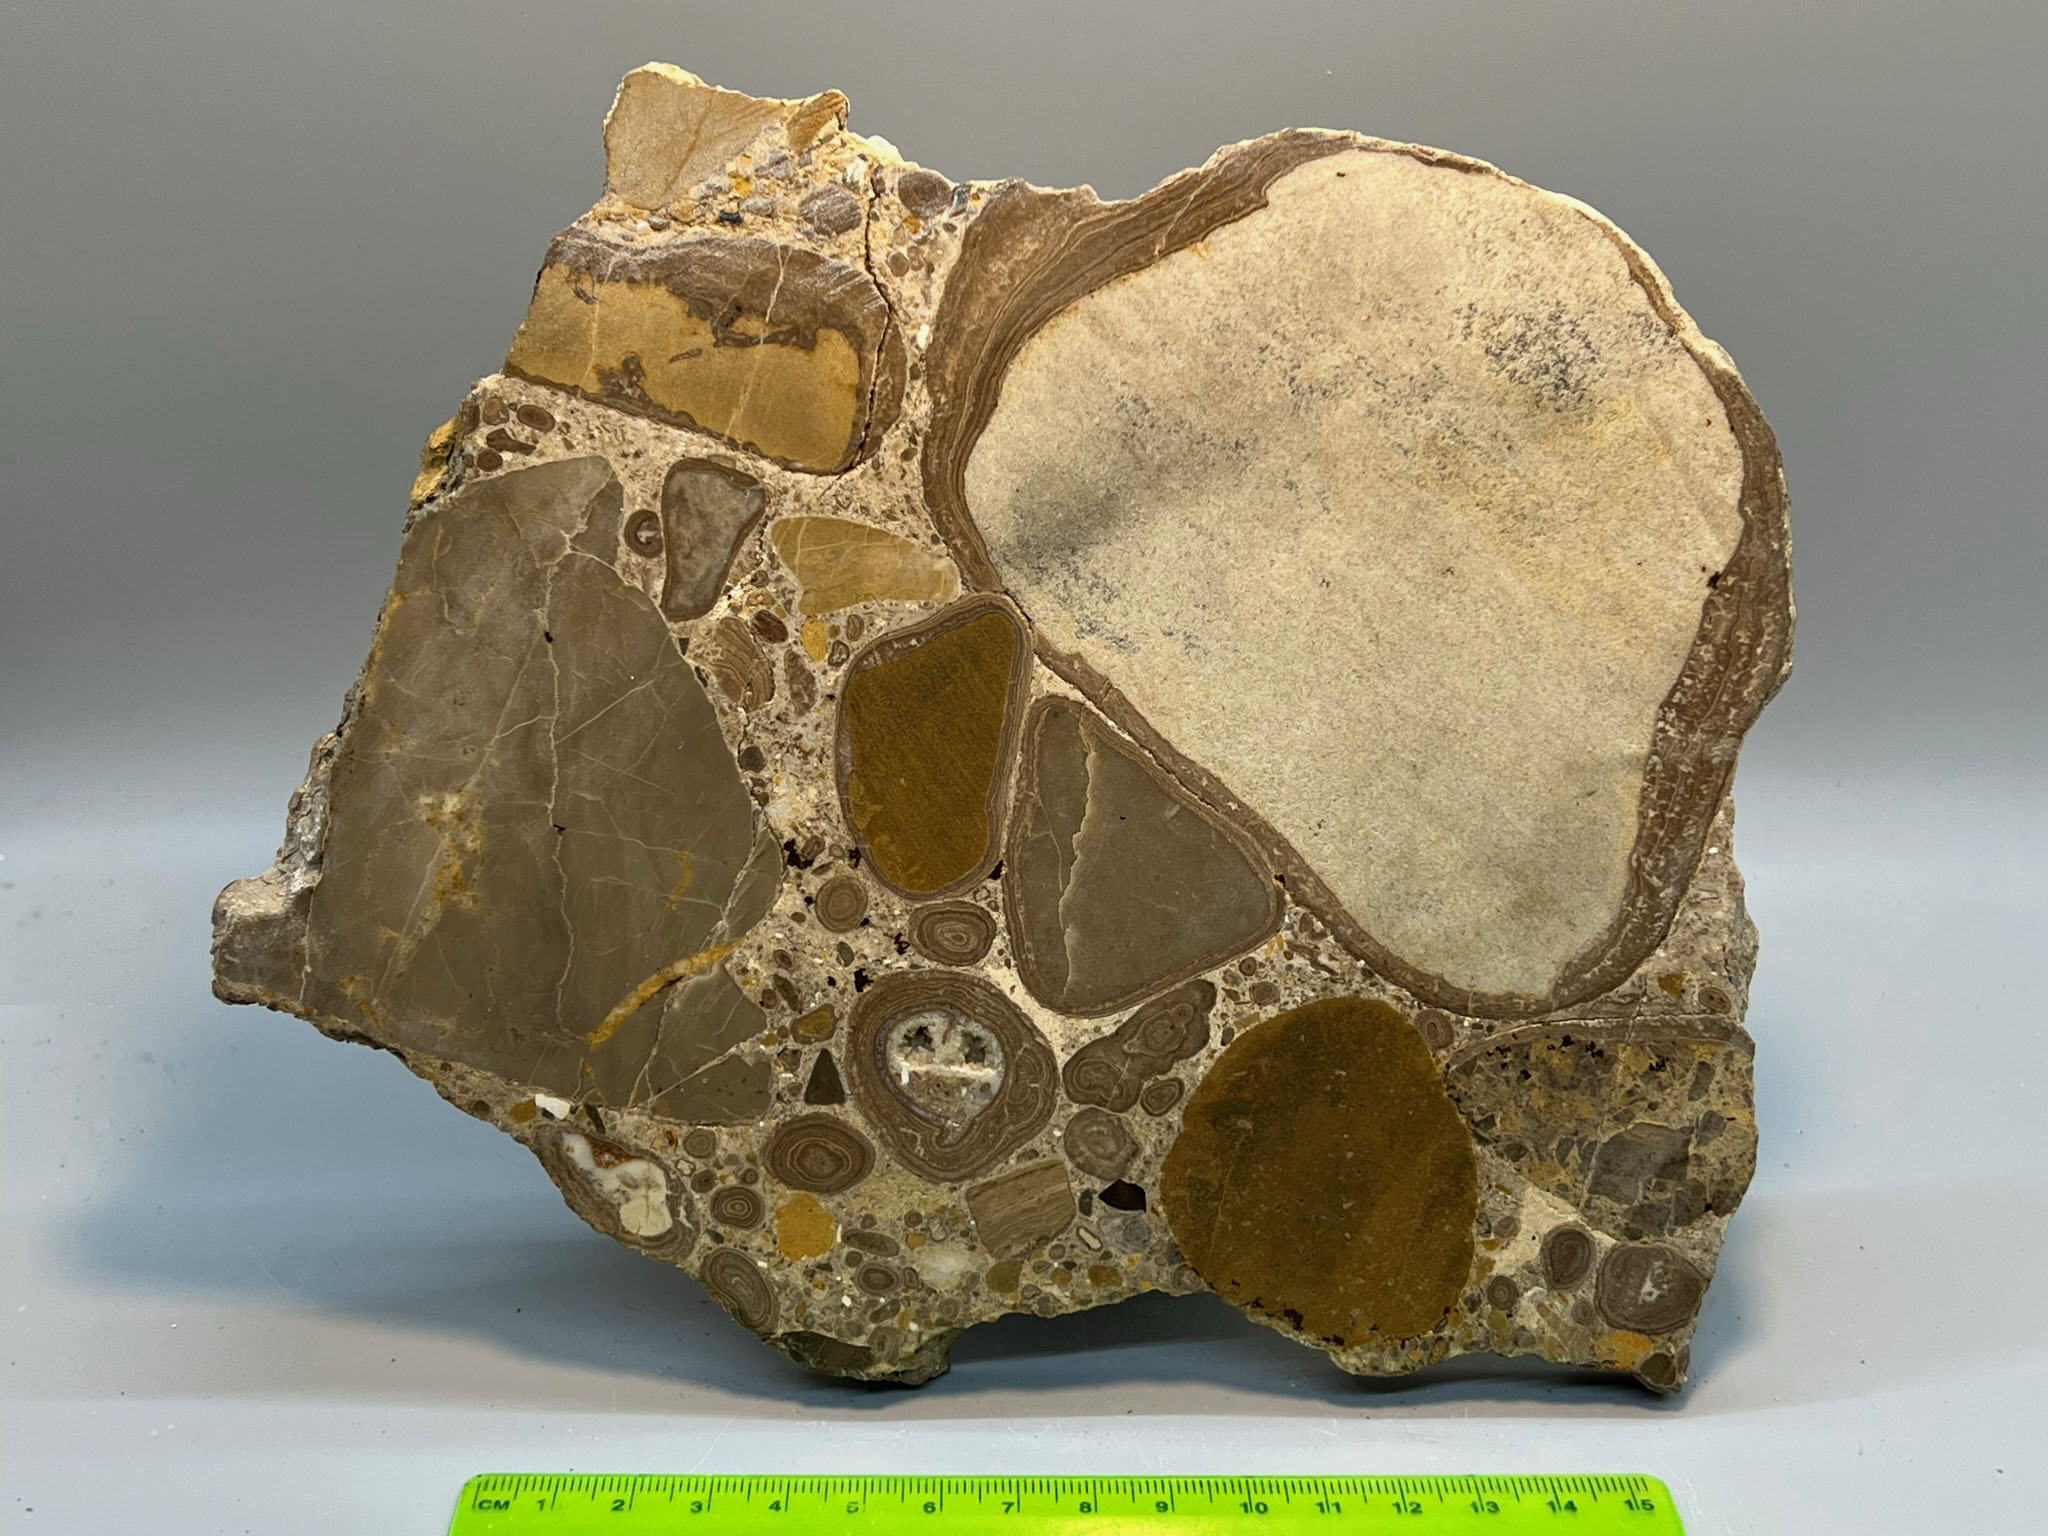 Pisolith conglomerate